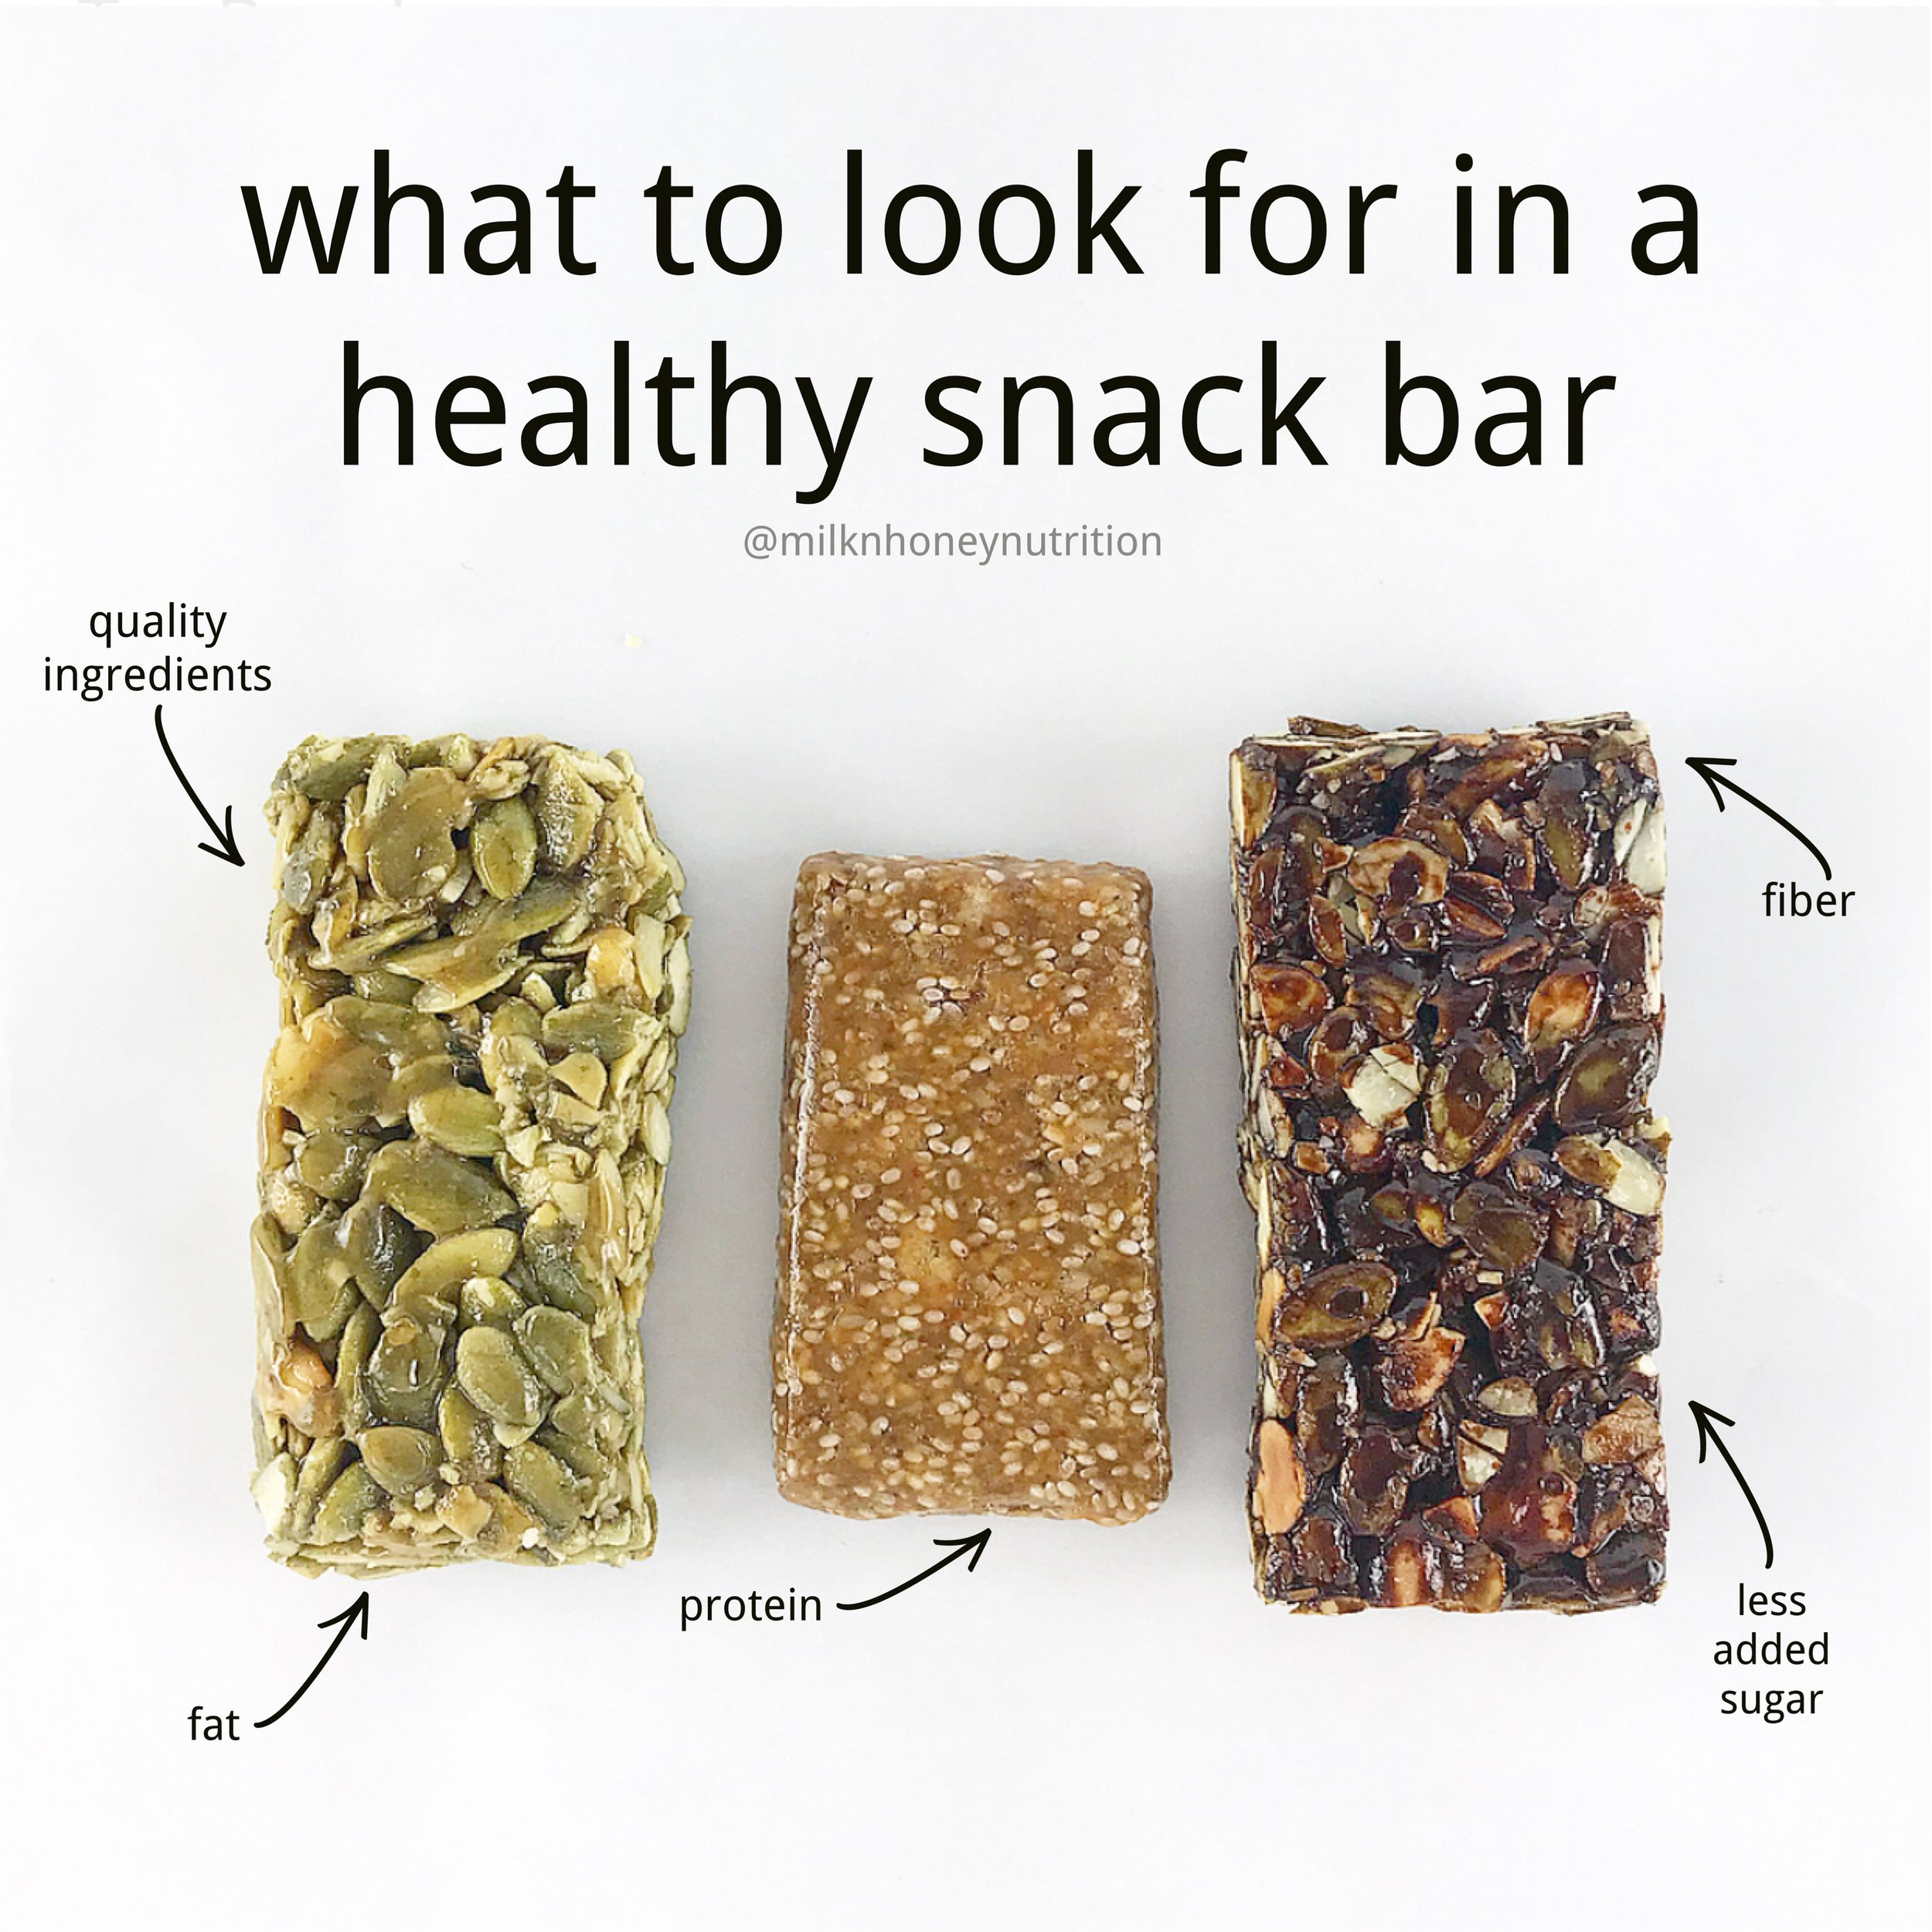 Nutritional snack bars